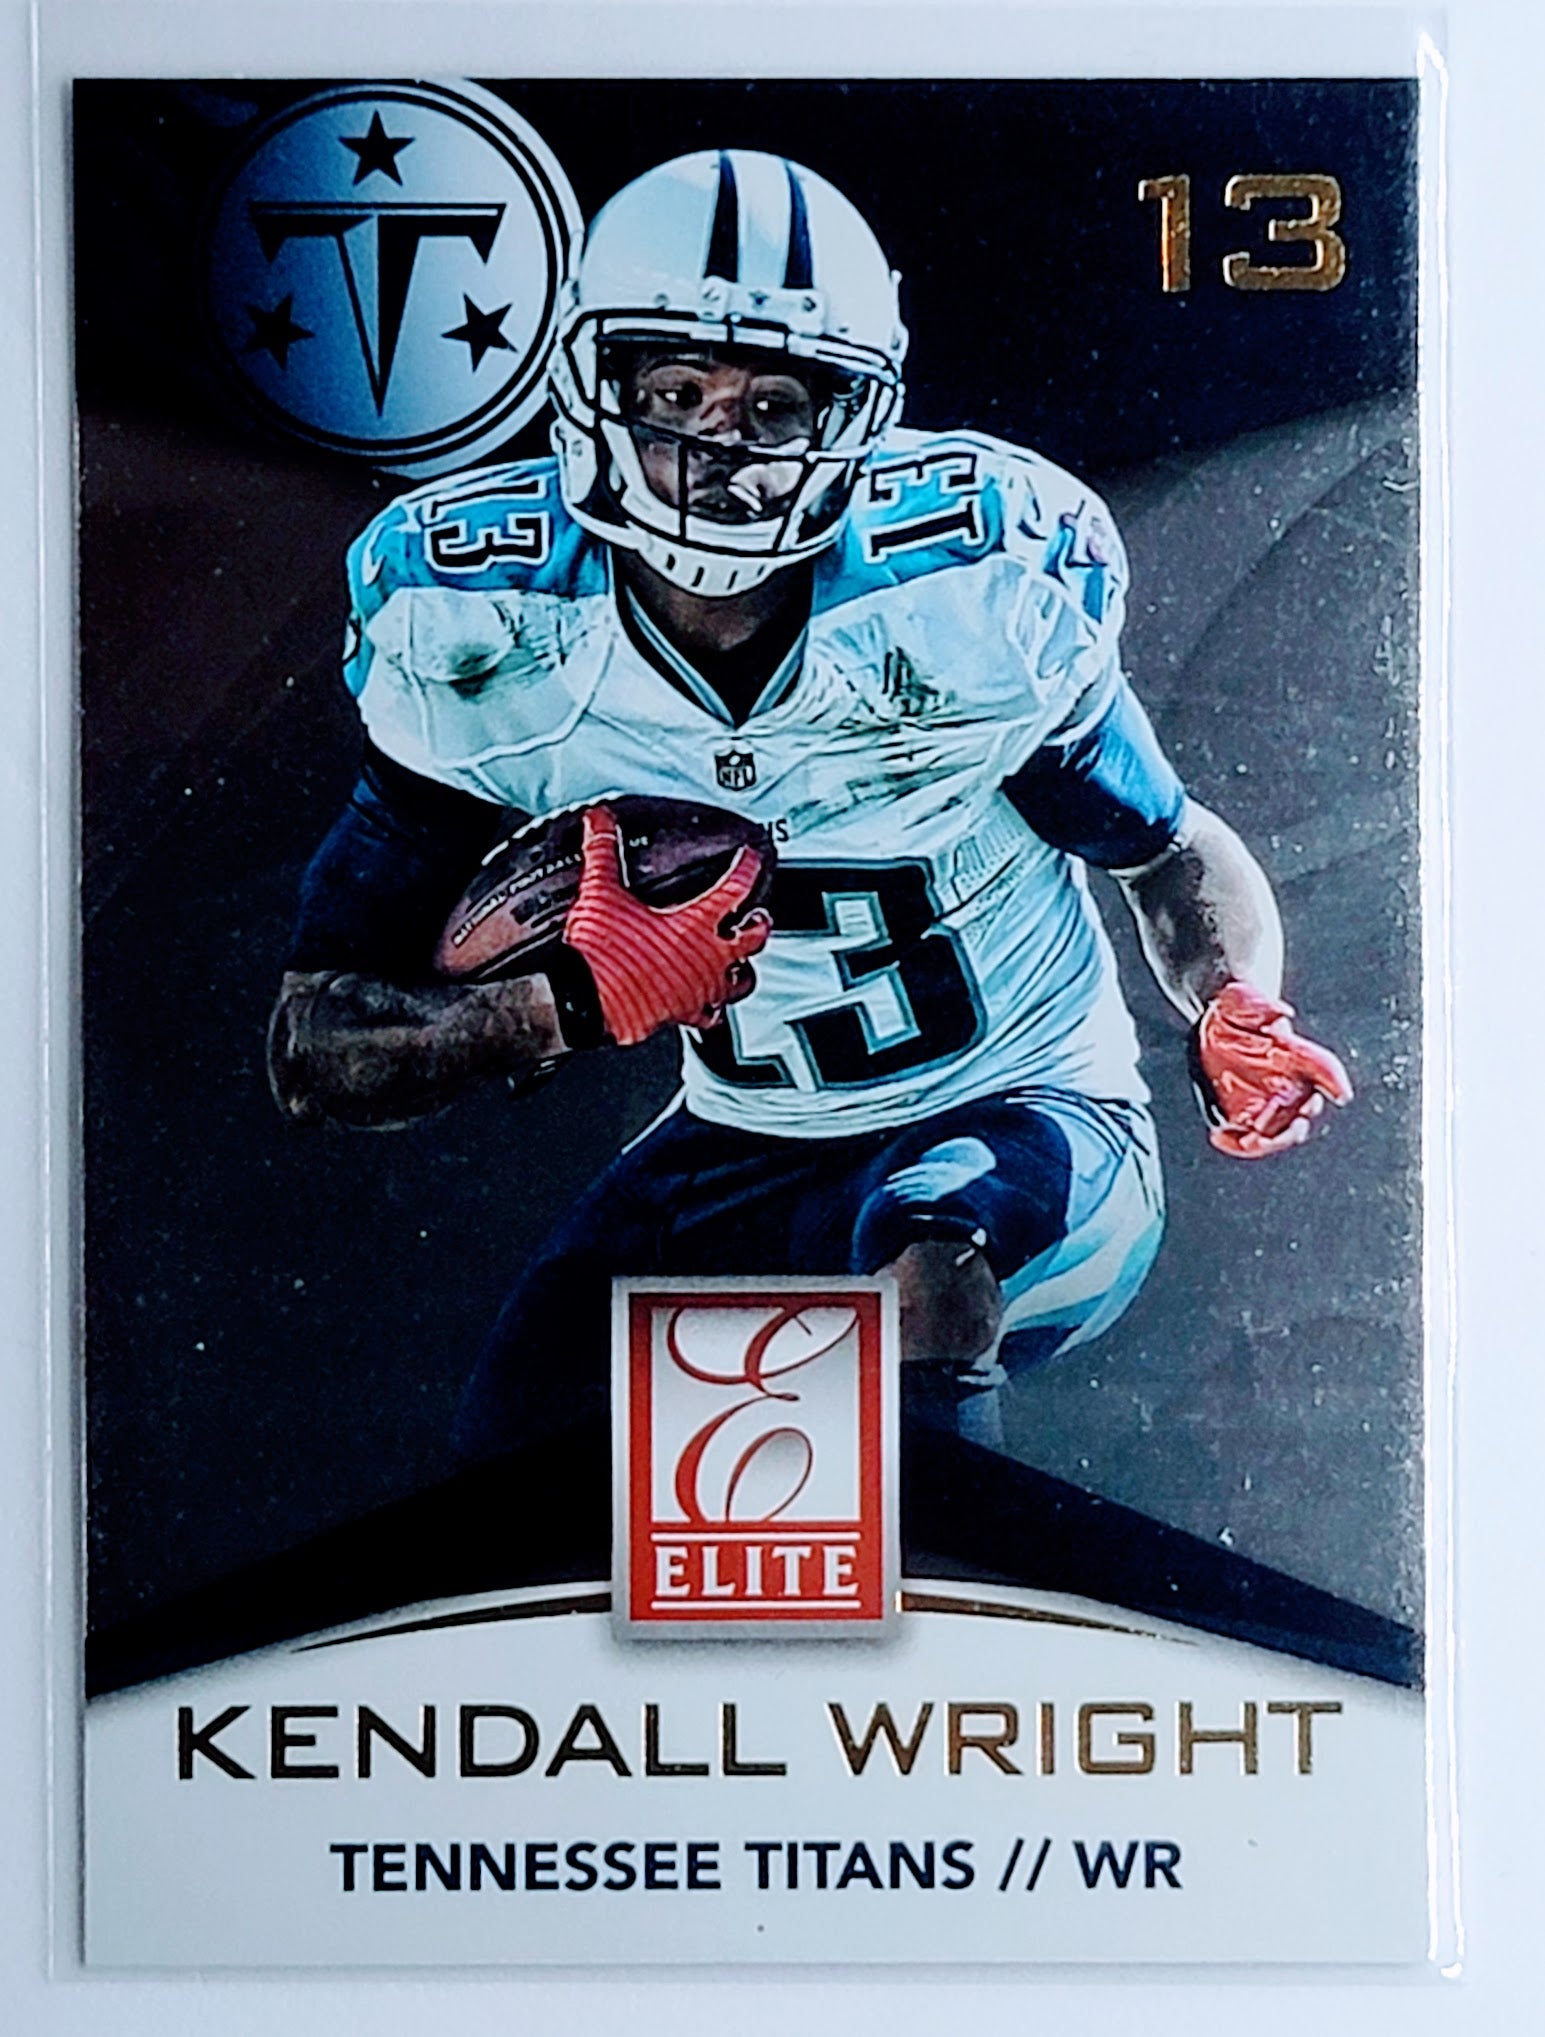 2015 Donruss Kendall Wright
Elite Tennessee Titans Football
  Card  TH1CB simple Xclusive Collectibles   